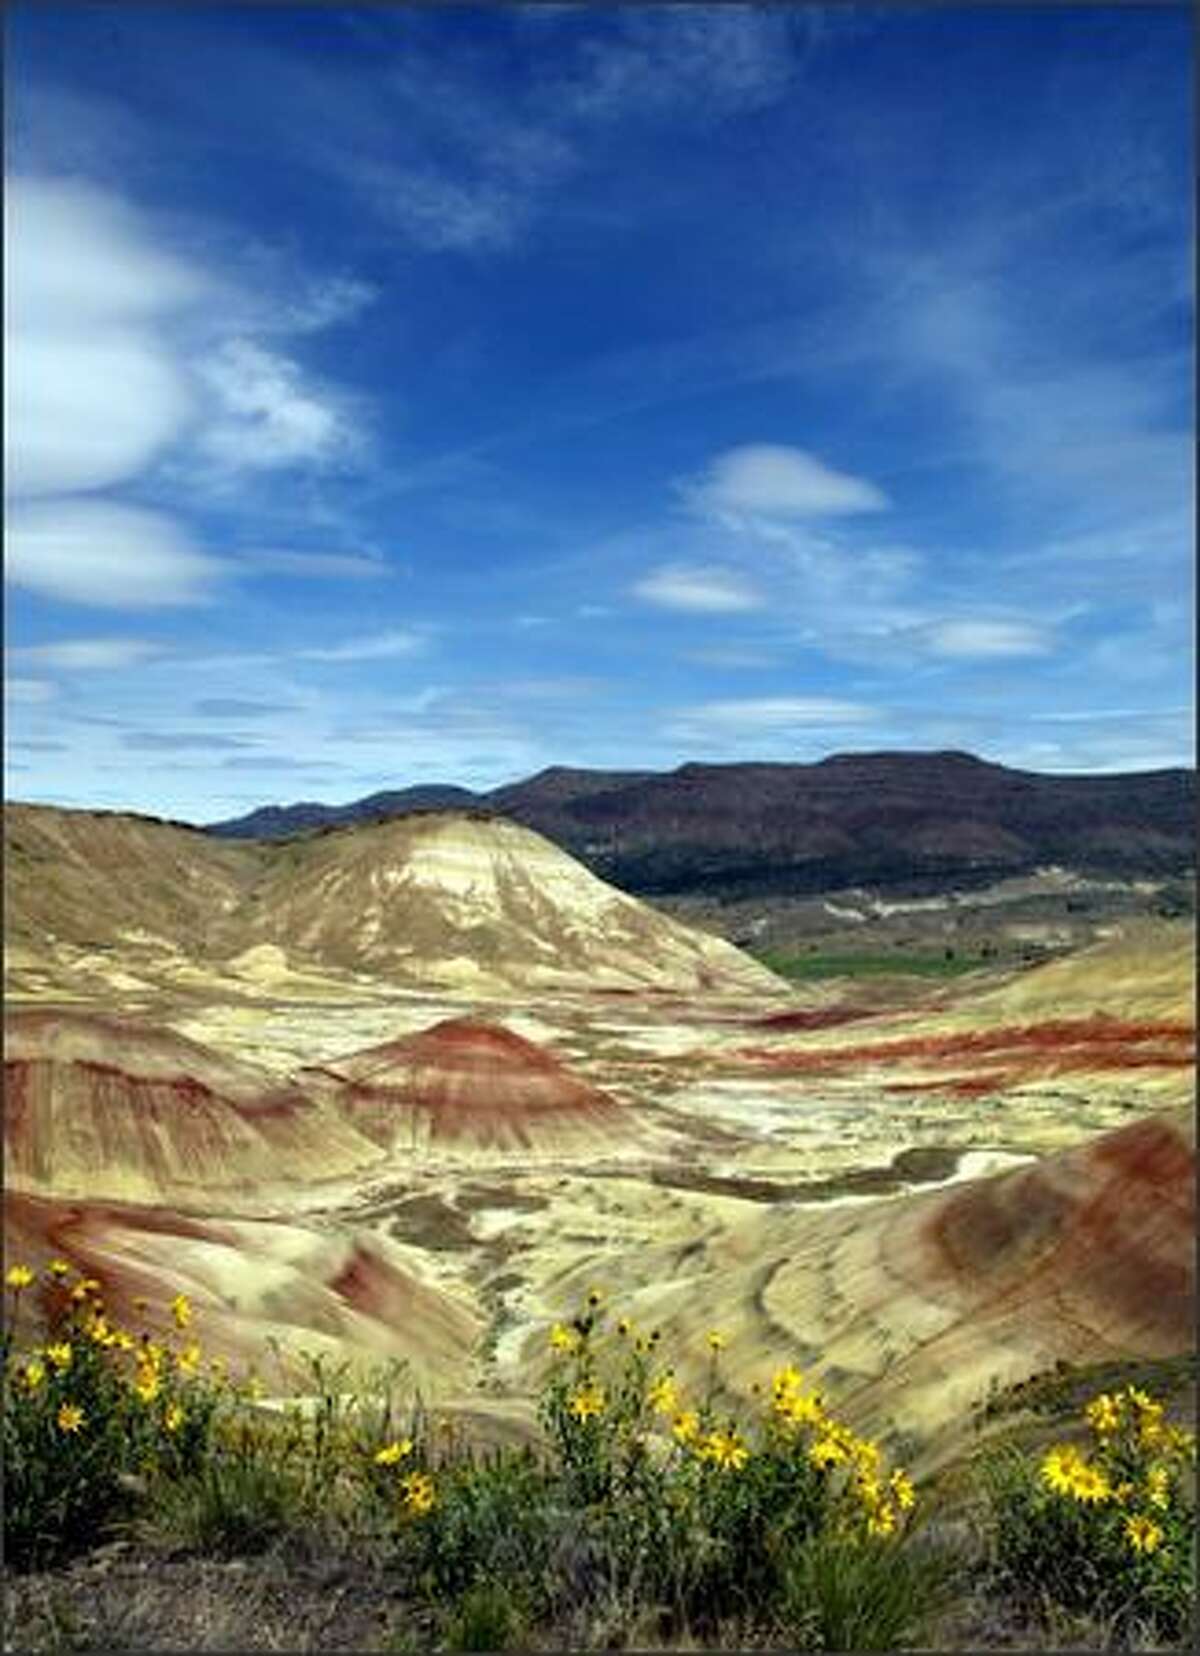 A view of the Painted Hills, foreground, with Carrol Rim in the center and the Sutton Mountains in the background.